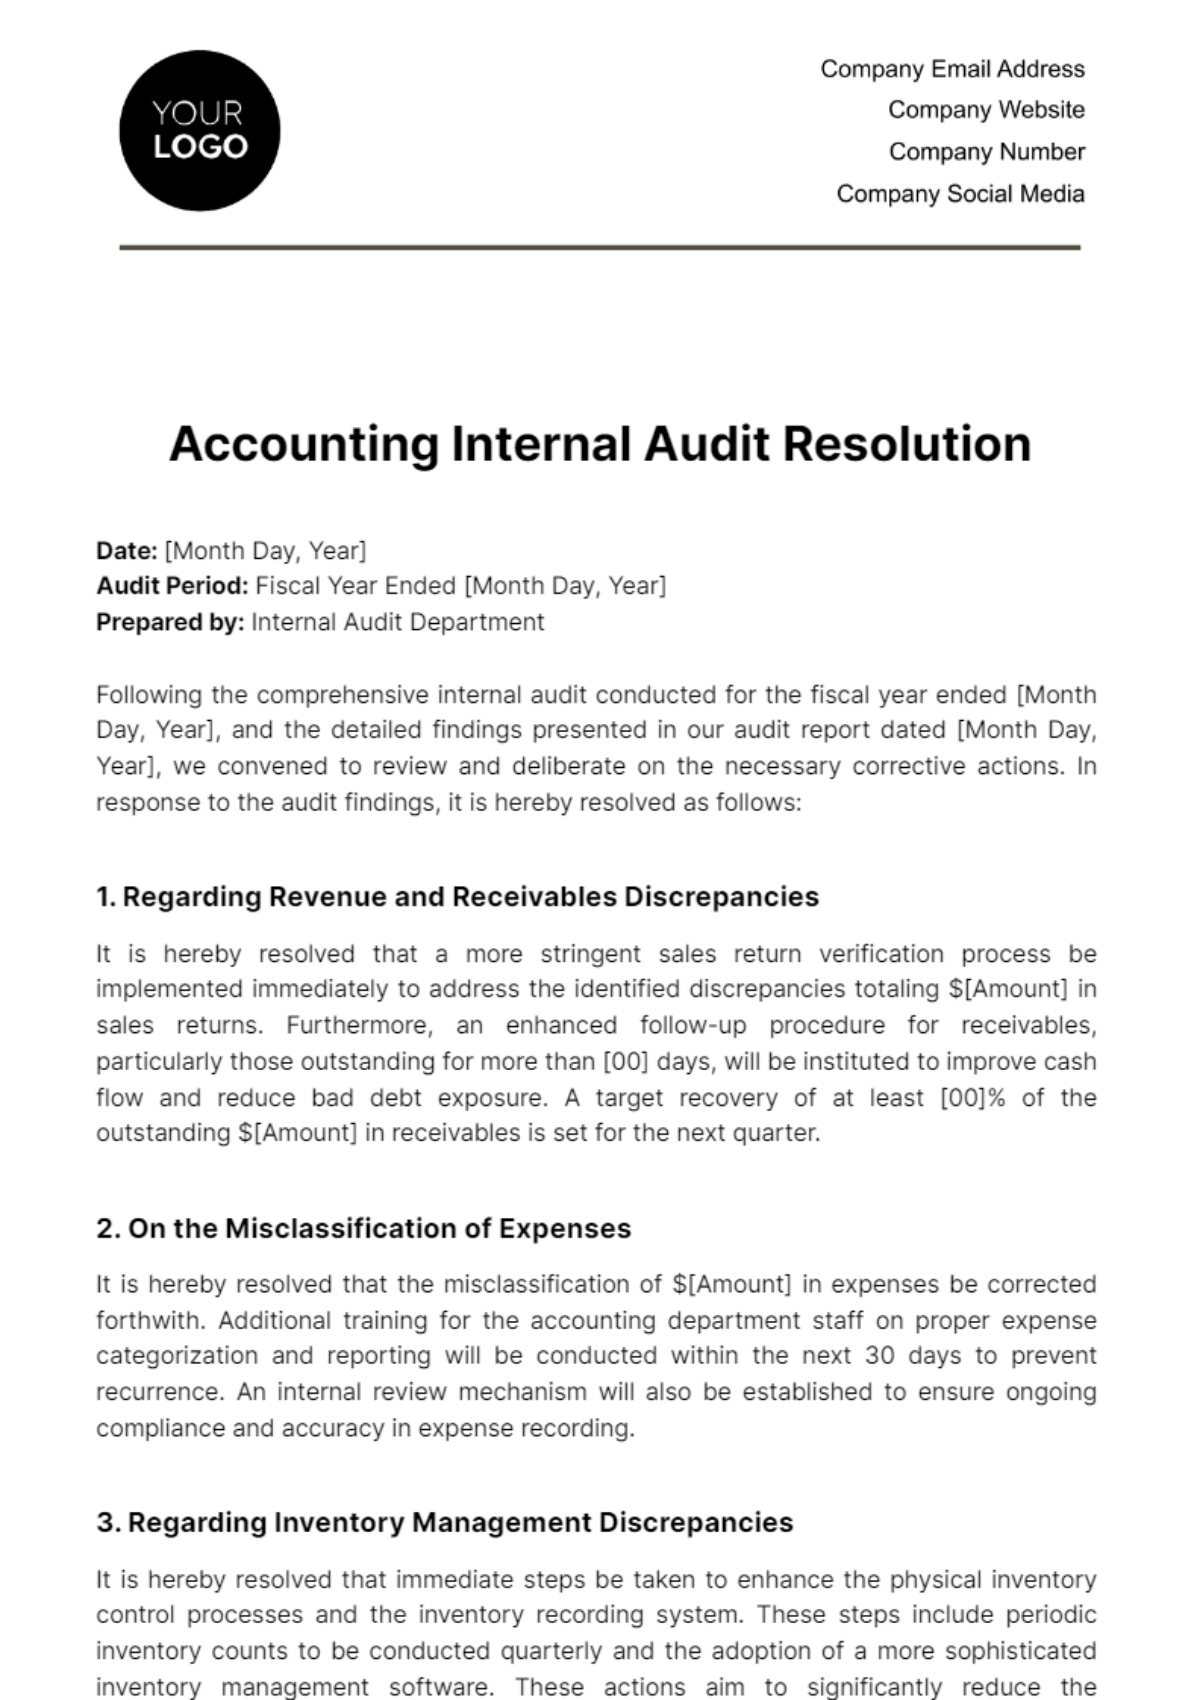 Accounting Internal Audit Resolution Template